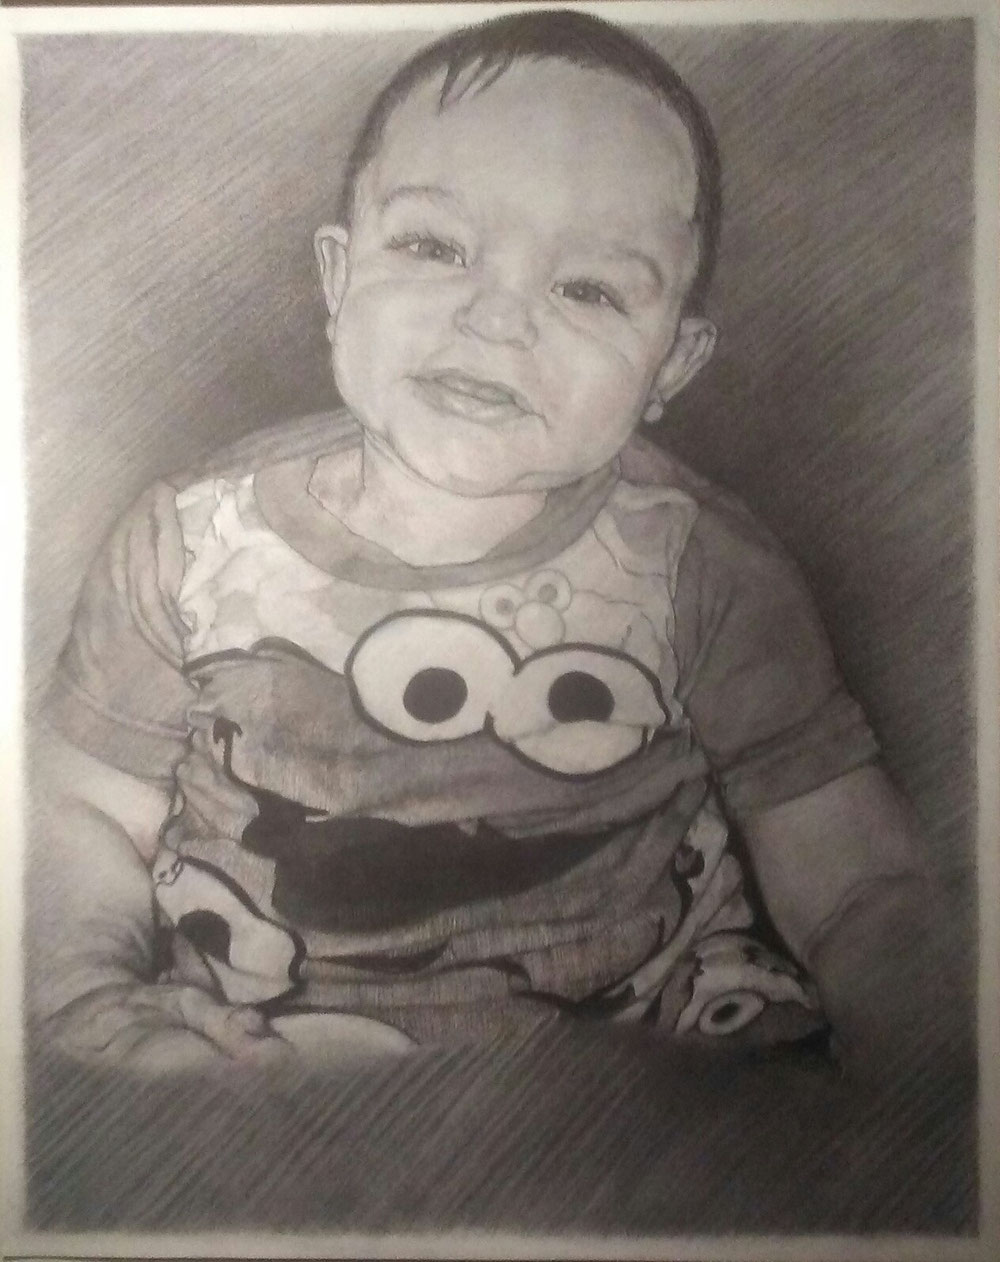 Everette - ...Finished! 😃 Now for the matting touch, and I know his mom will be so happy to have it~ Next up... pastel portraits of two individual's who have passed. Whenever I draw these portraits in particular, the Light of the Most High Divine shine's upon them. Stay tuned... I'll be bringing 'em aboard tomorrow from pencil sketch to life-like color, right before your eyes. "Cheerio"~